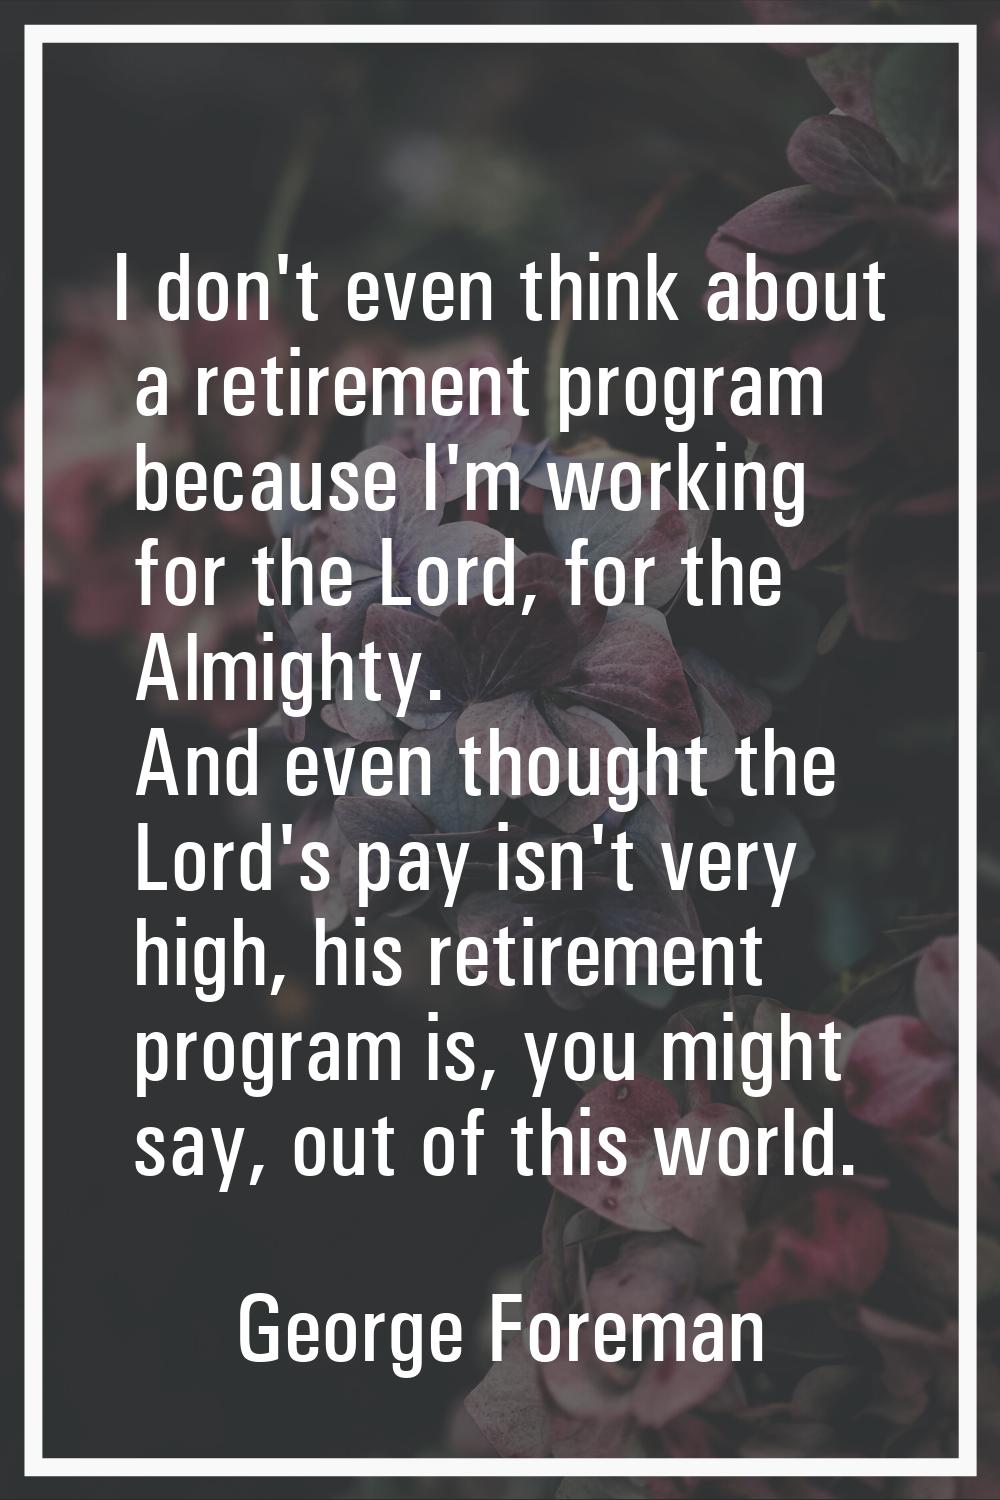 I don't even think about a retirement program because I'm working for the Lord, for the Almighty. A